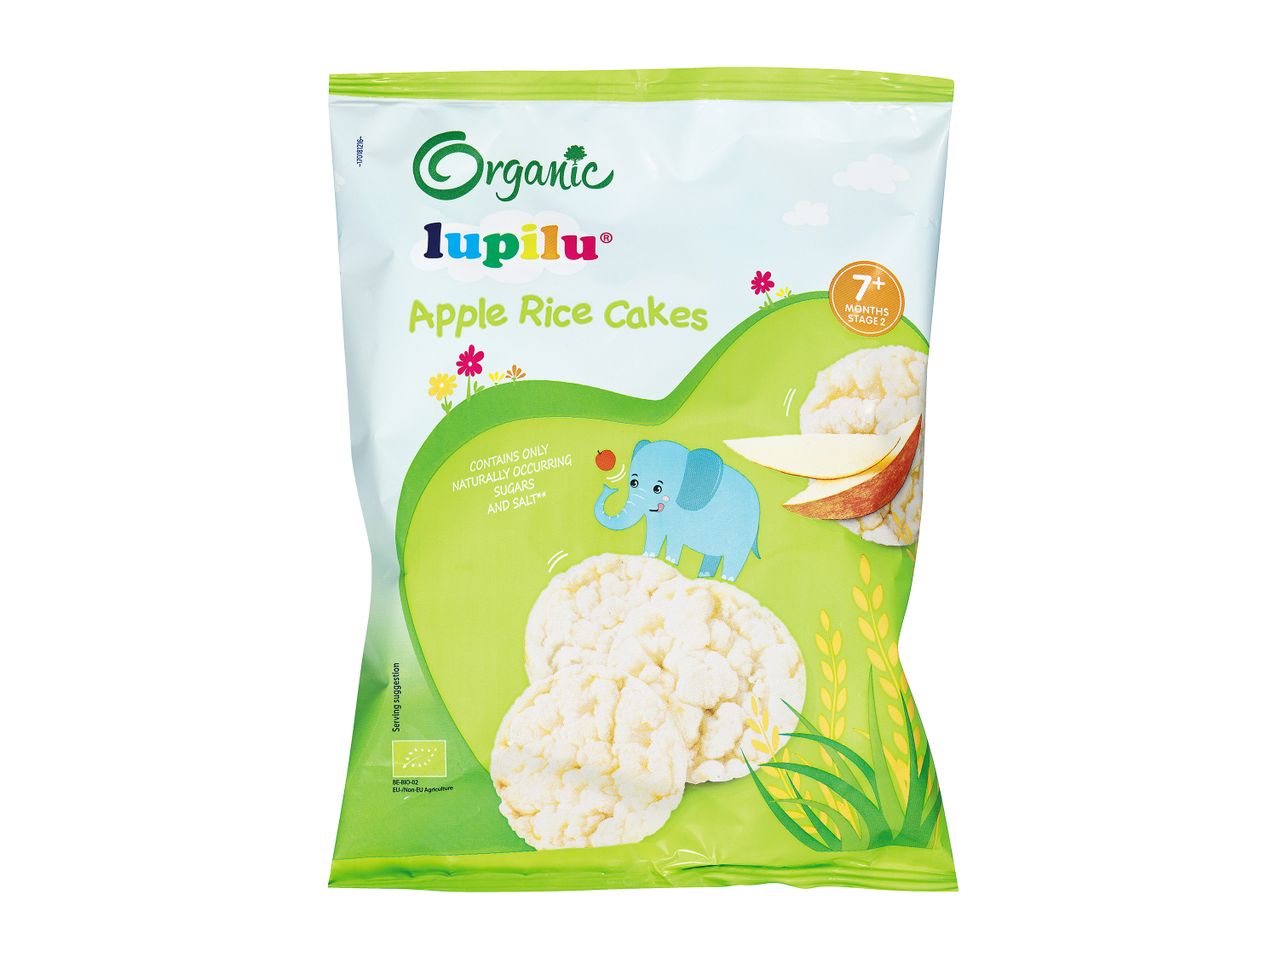 Go to full screen view: Lupilu Organic Apple Rice Cakes - Image 1